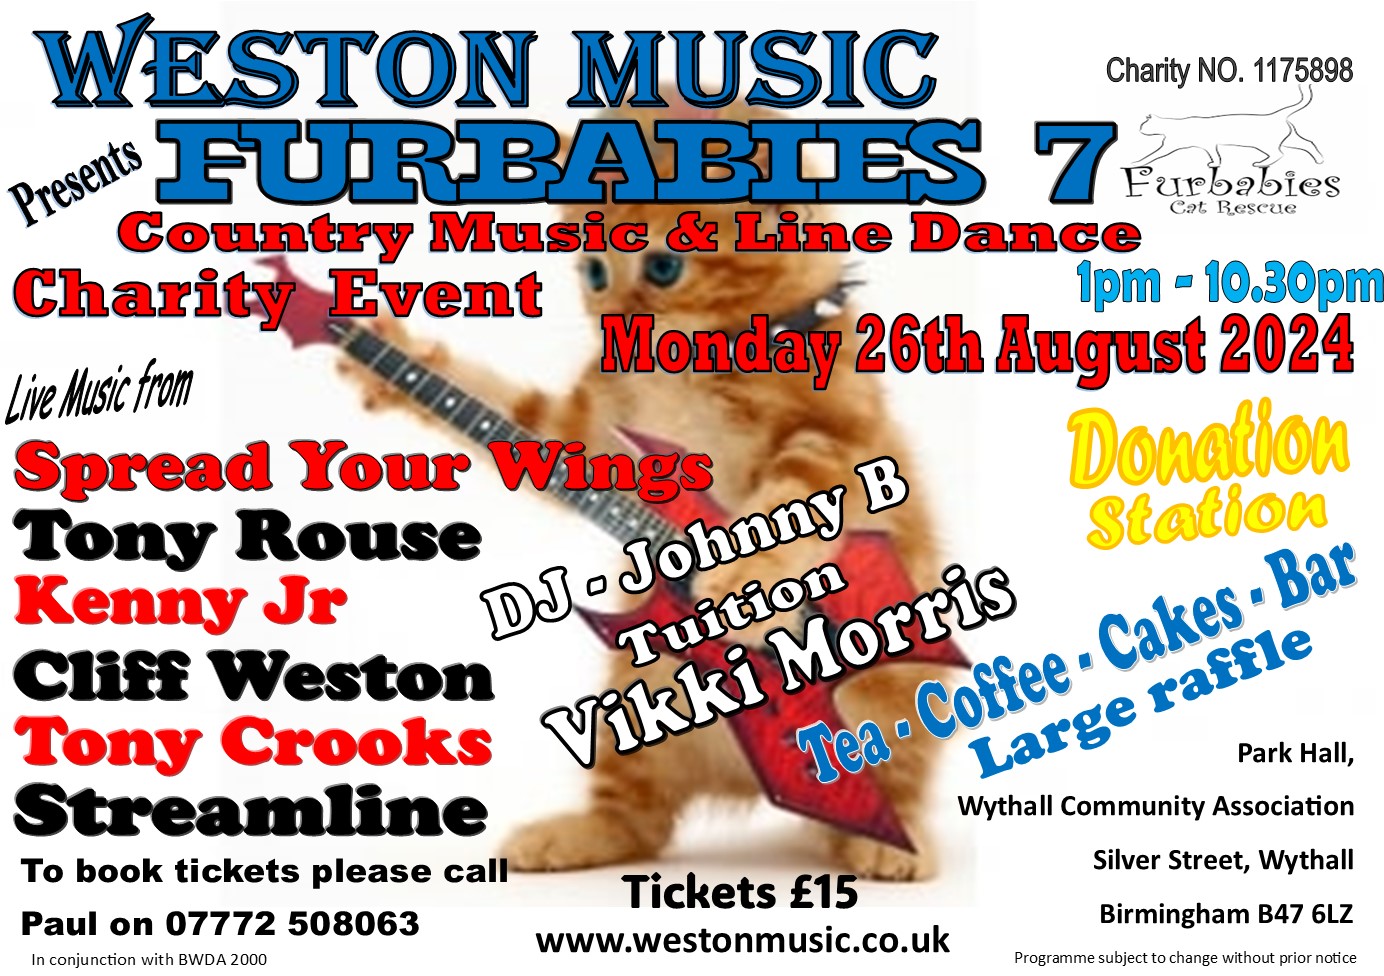 Weston Music presents Furbabies 7 on Monday 2 August 2024 from 1pm to 10.30pm. Live Music Acts, Raffles, Country Music and Line Dancing.